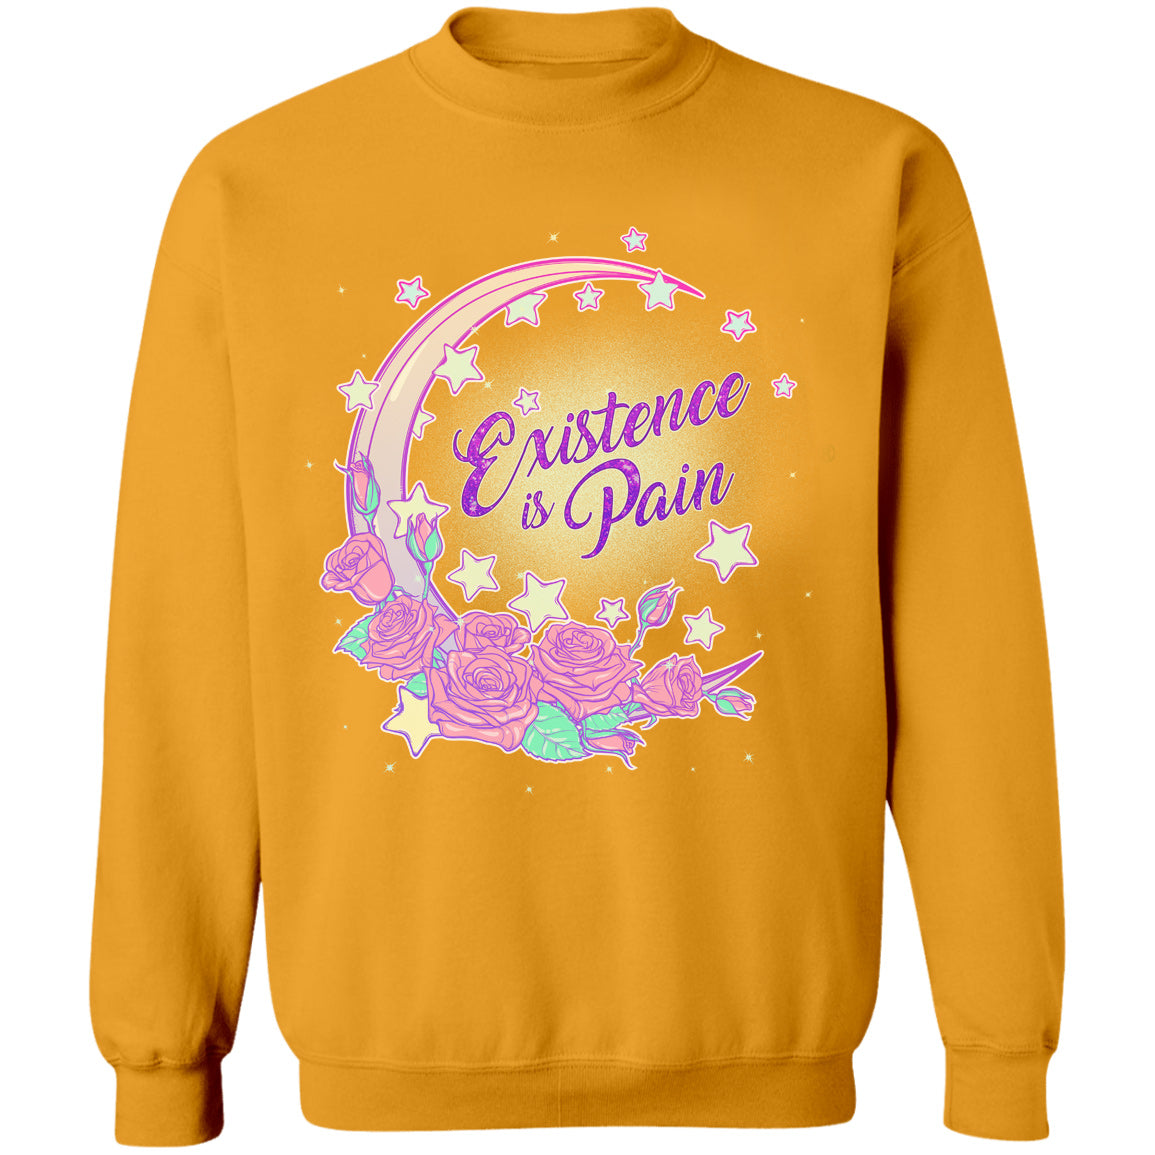 Existence is Pain Crewneck Sweatshirt by palm-treat.myshopify.com for sale online now - the latest Vaporwave &amp; Soft Grunge Clothing